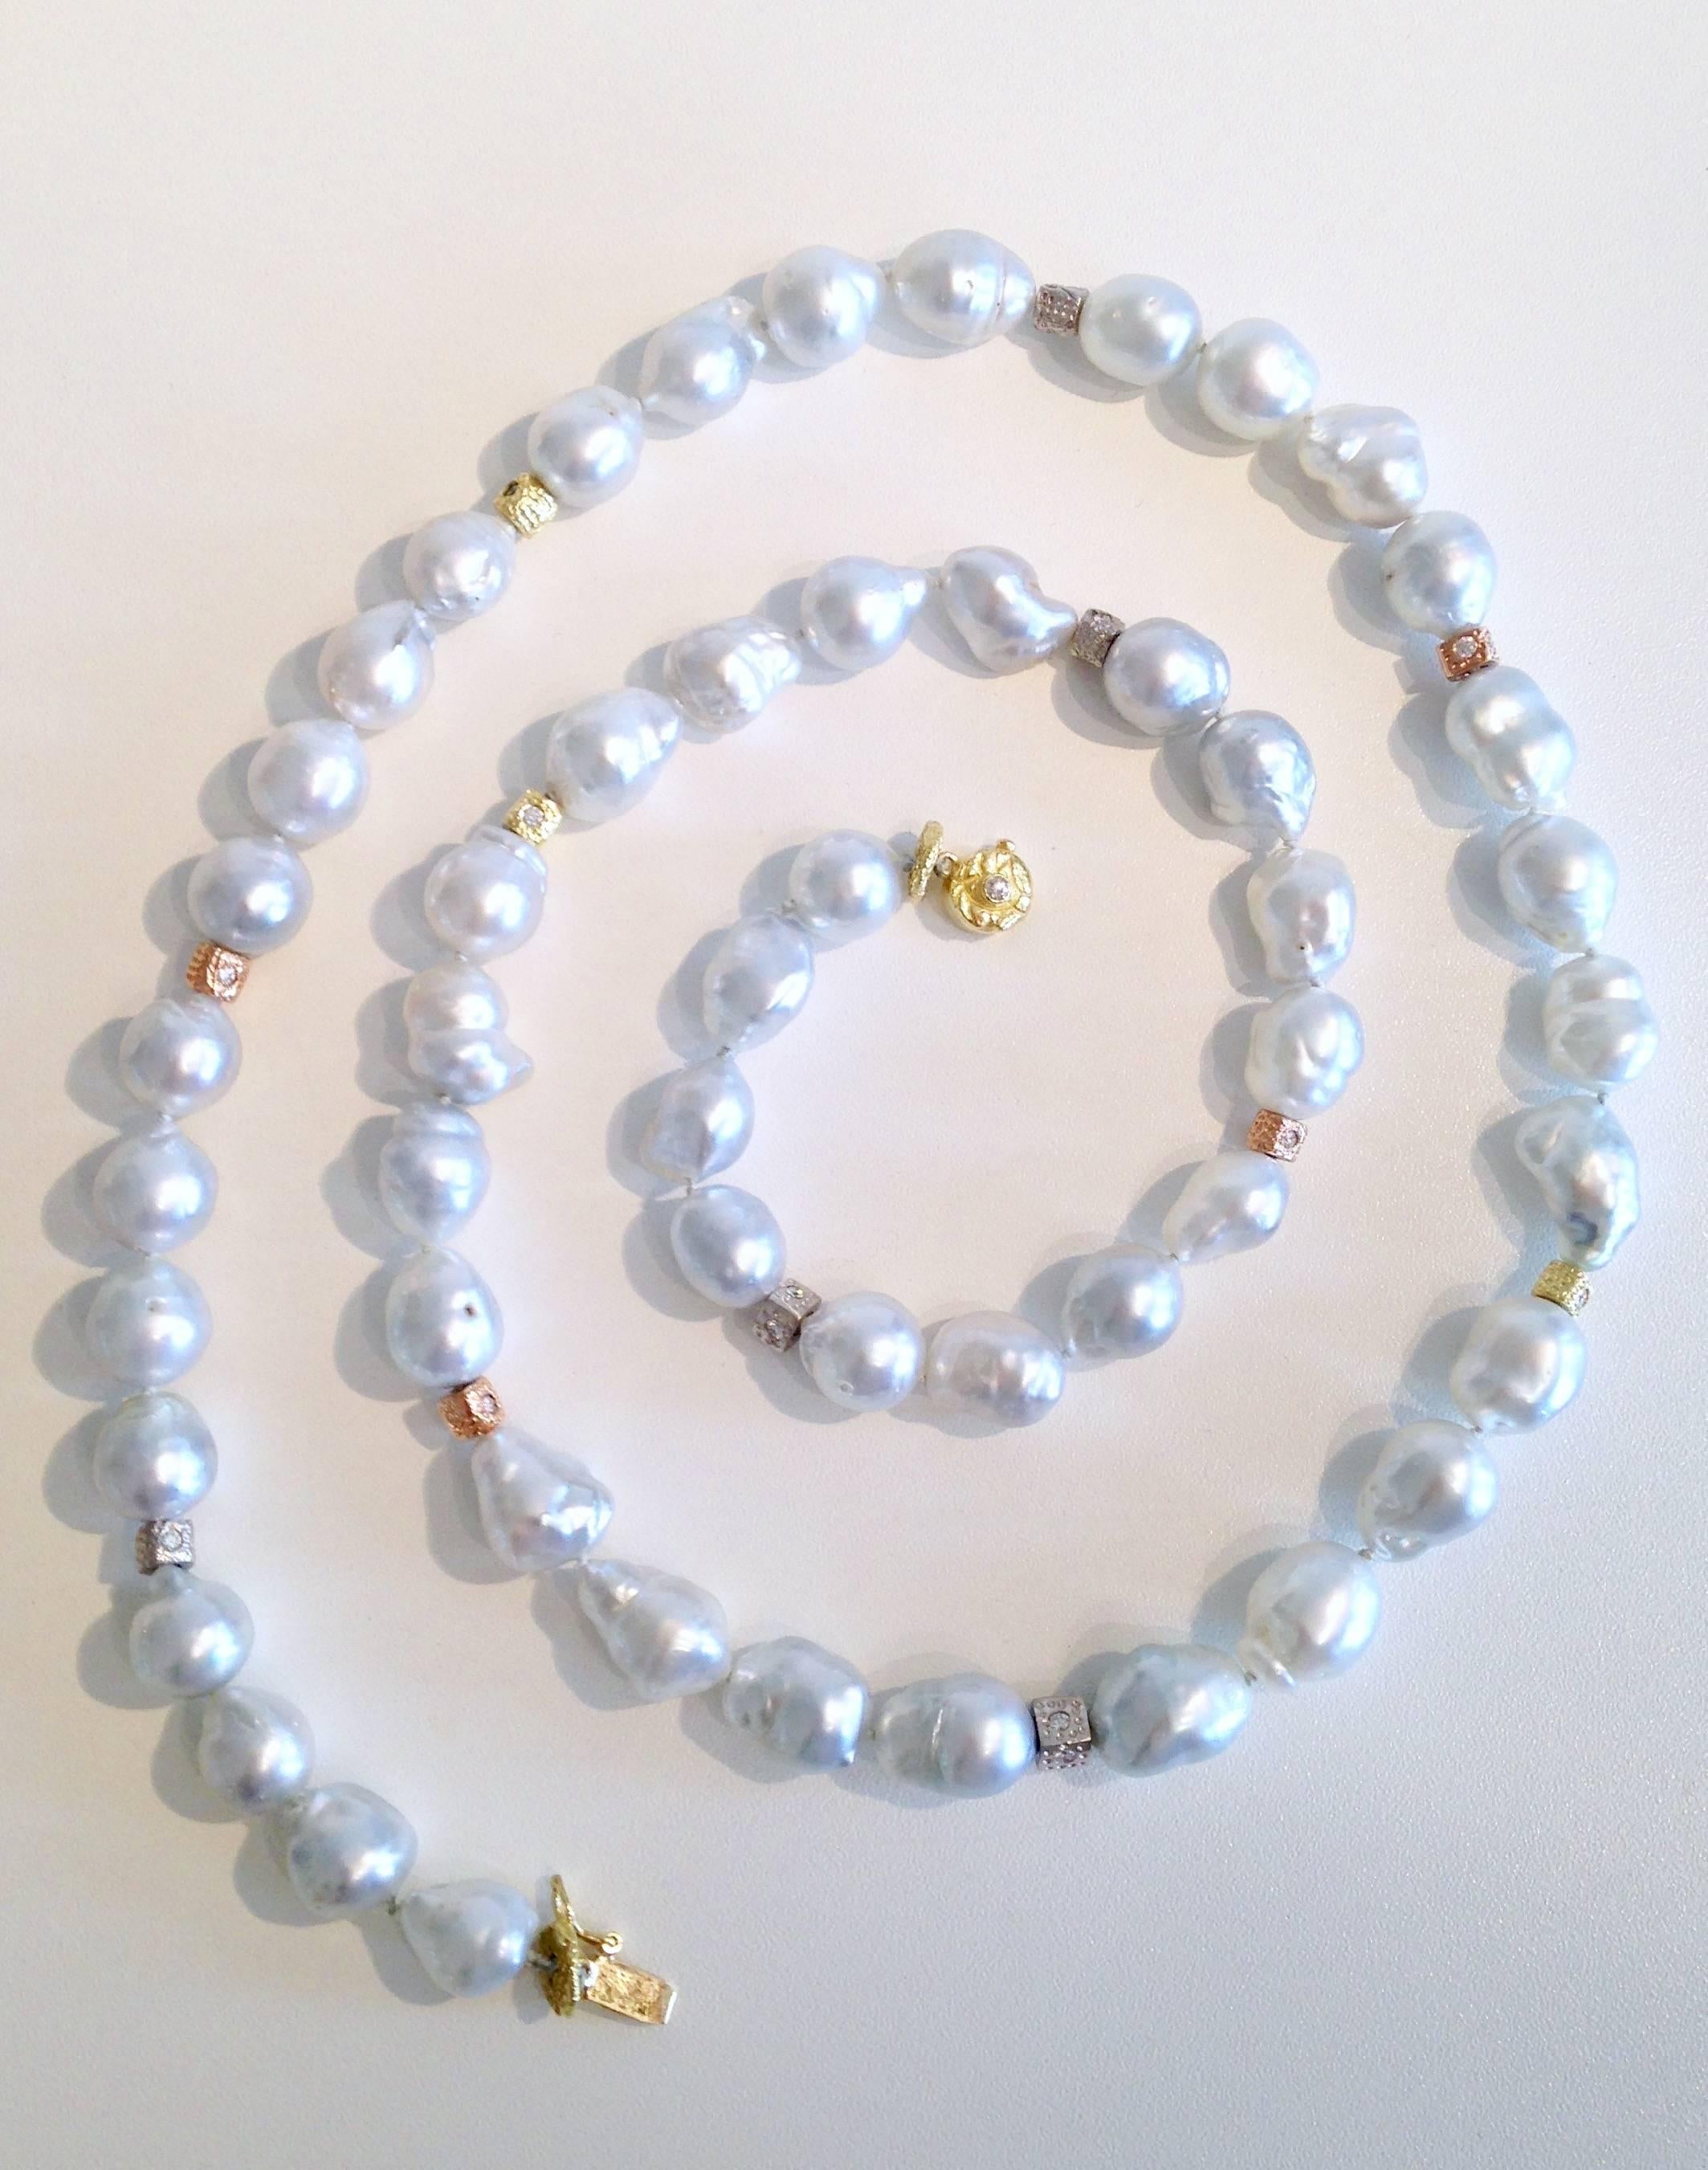 Women's or Men's Silver-White Baroque Pearl Necklace with Diamond and Gold Beads